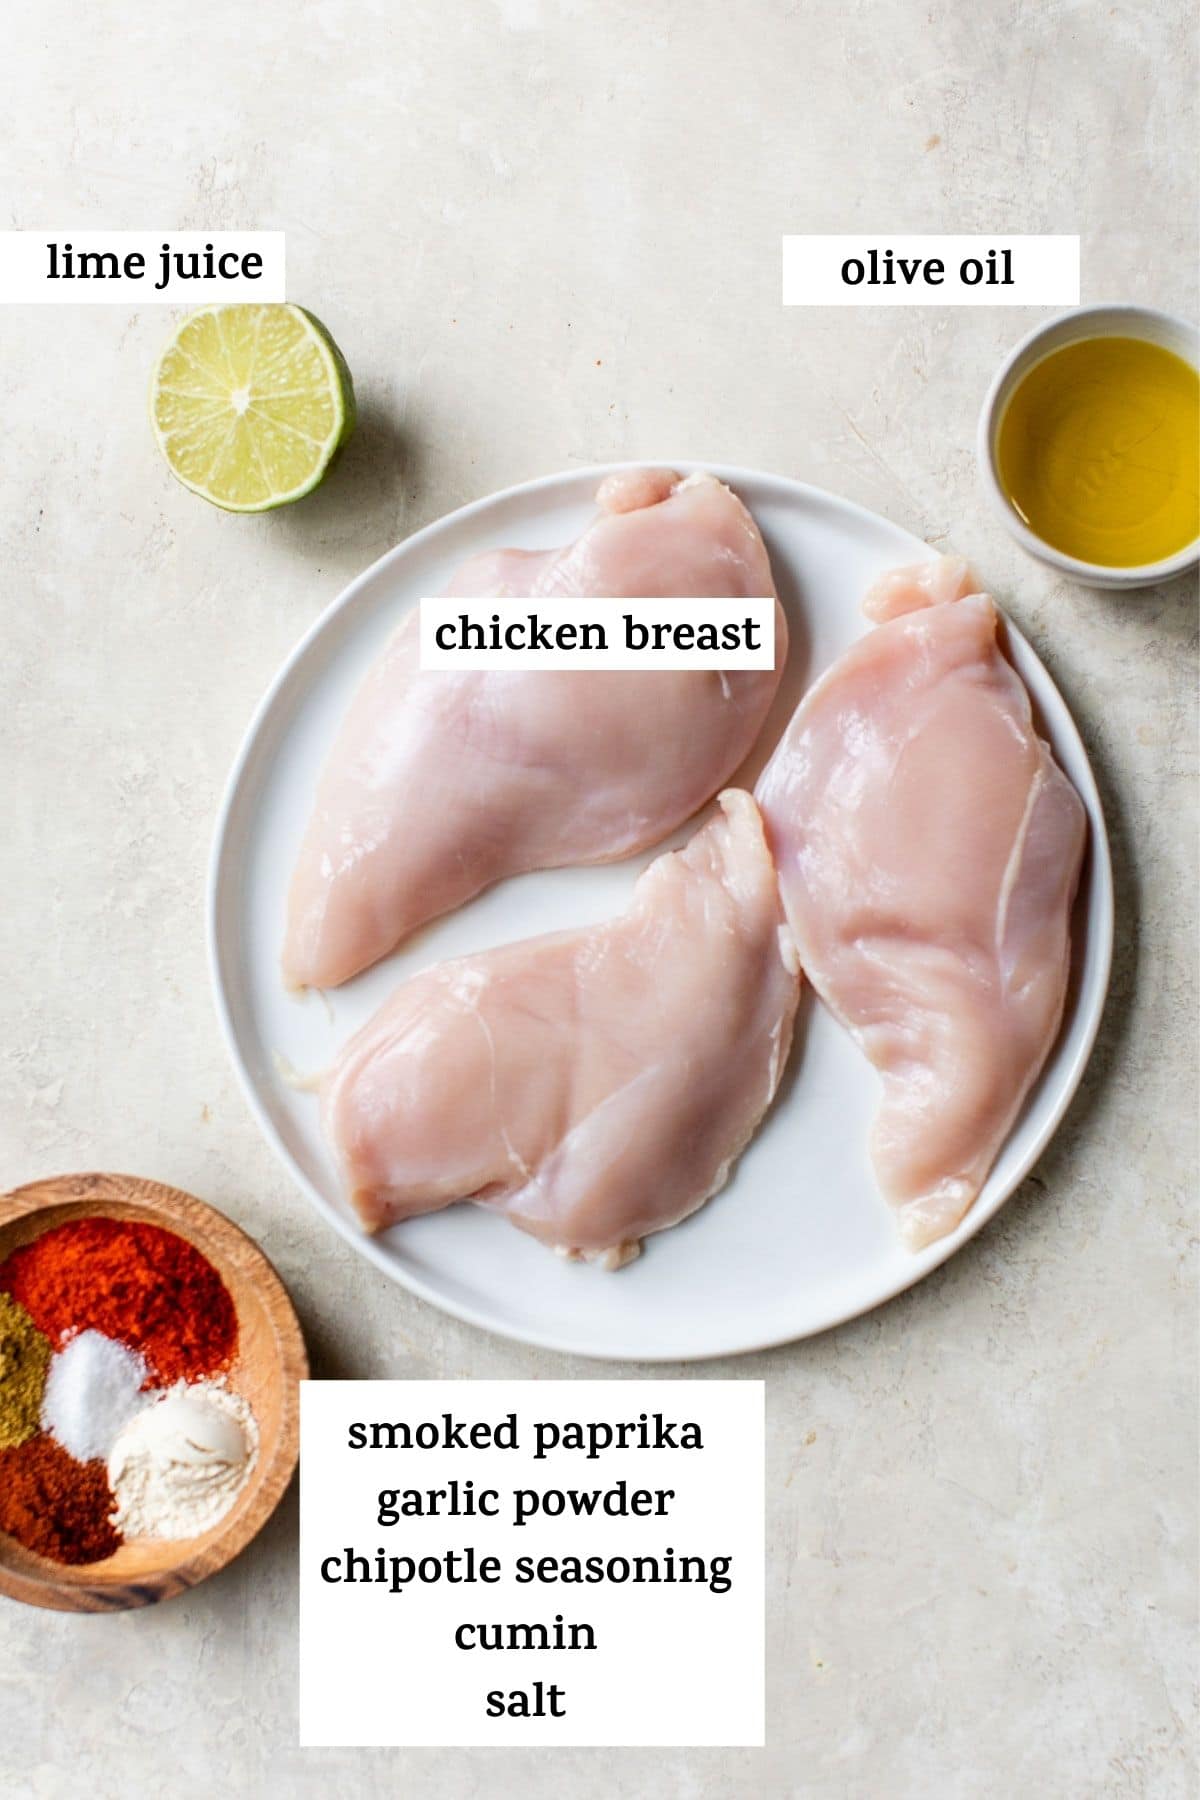 raw chicken breasts on a plate, along with olive oil, lime juice and spices